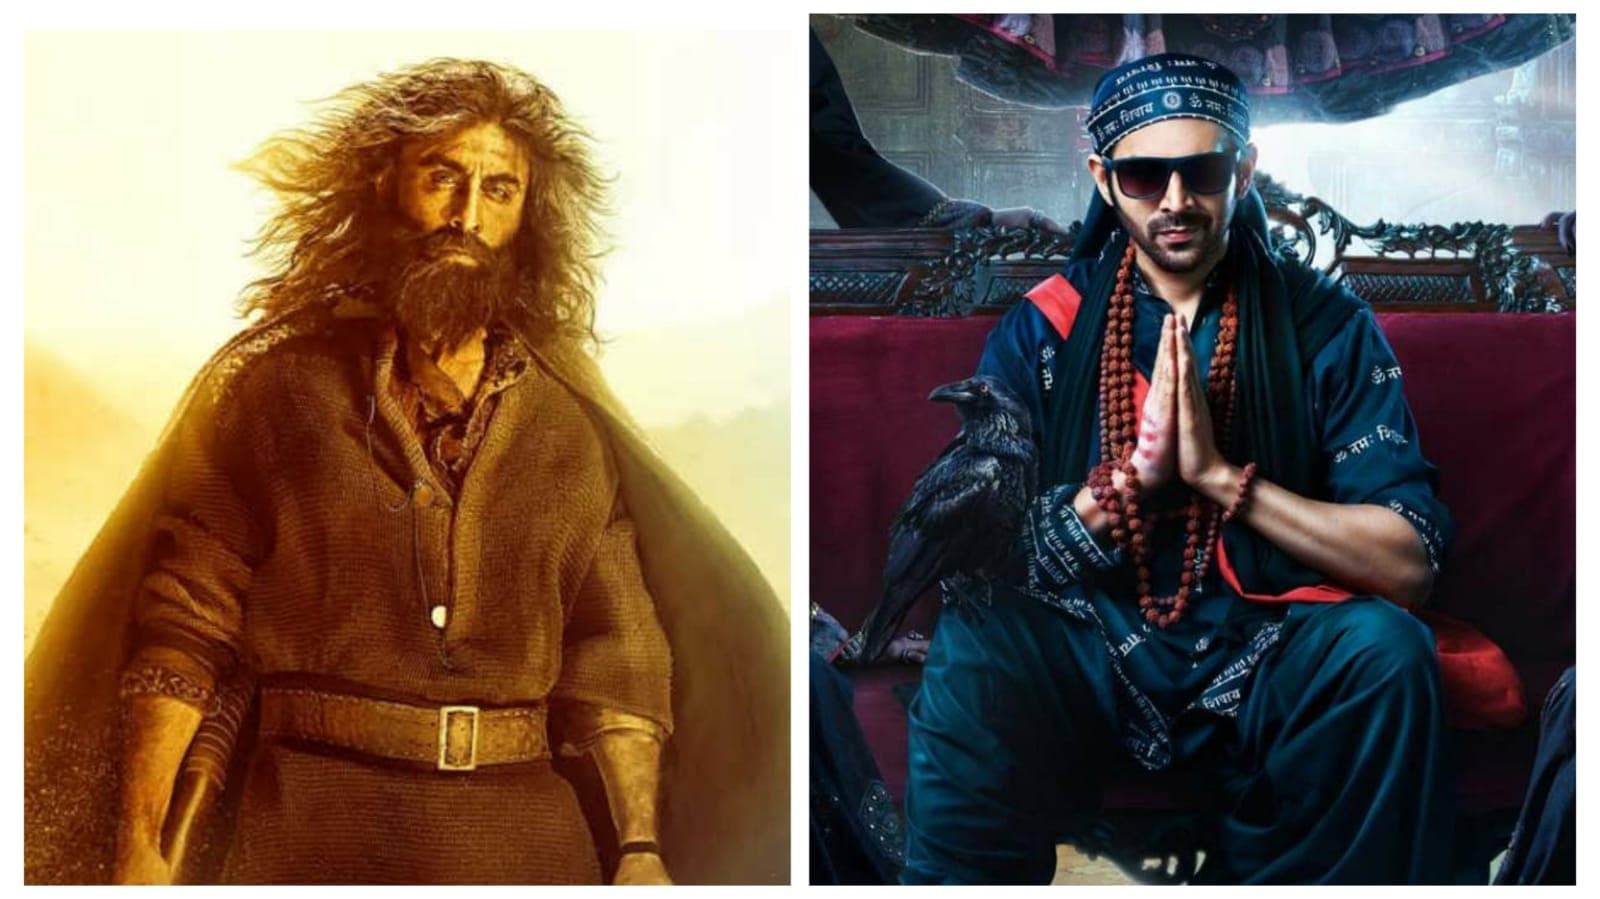 Ranveer Singh is the perfect combination of talent and stardom